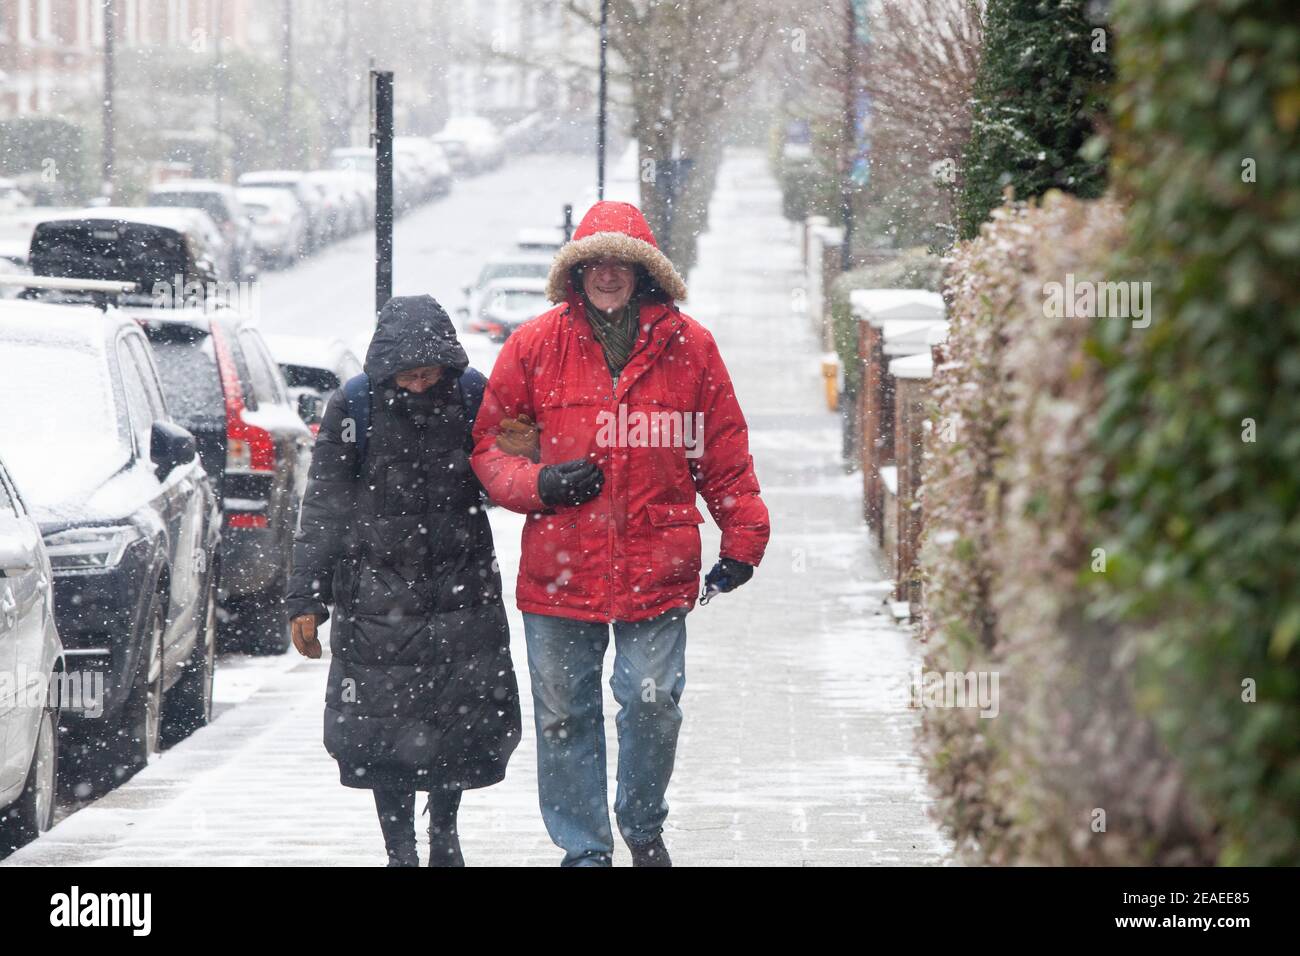 London, UK. 9 February 2021: After three days of snow in London it is starting to settle and winds have dropped as Storm Darcy has passed. In Clapham a few people take exercise. Anna Watson/Alamy Live News Stock Photo